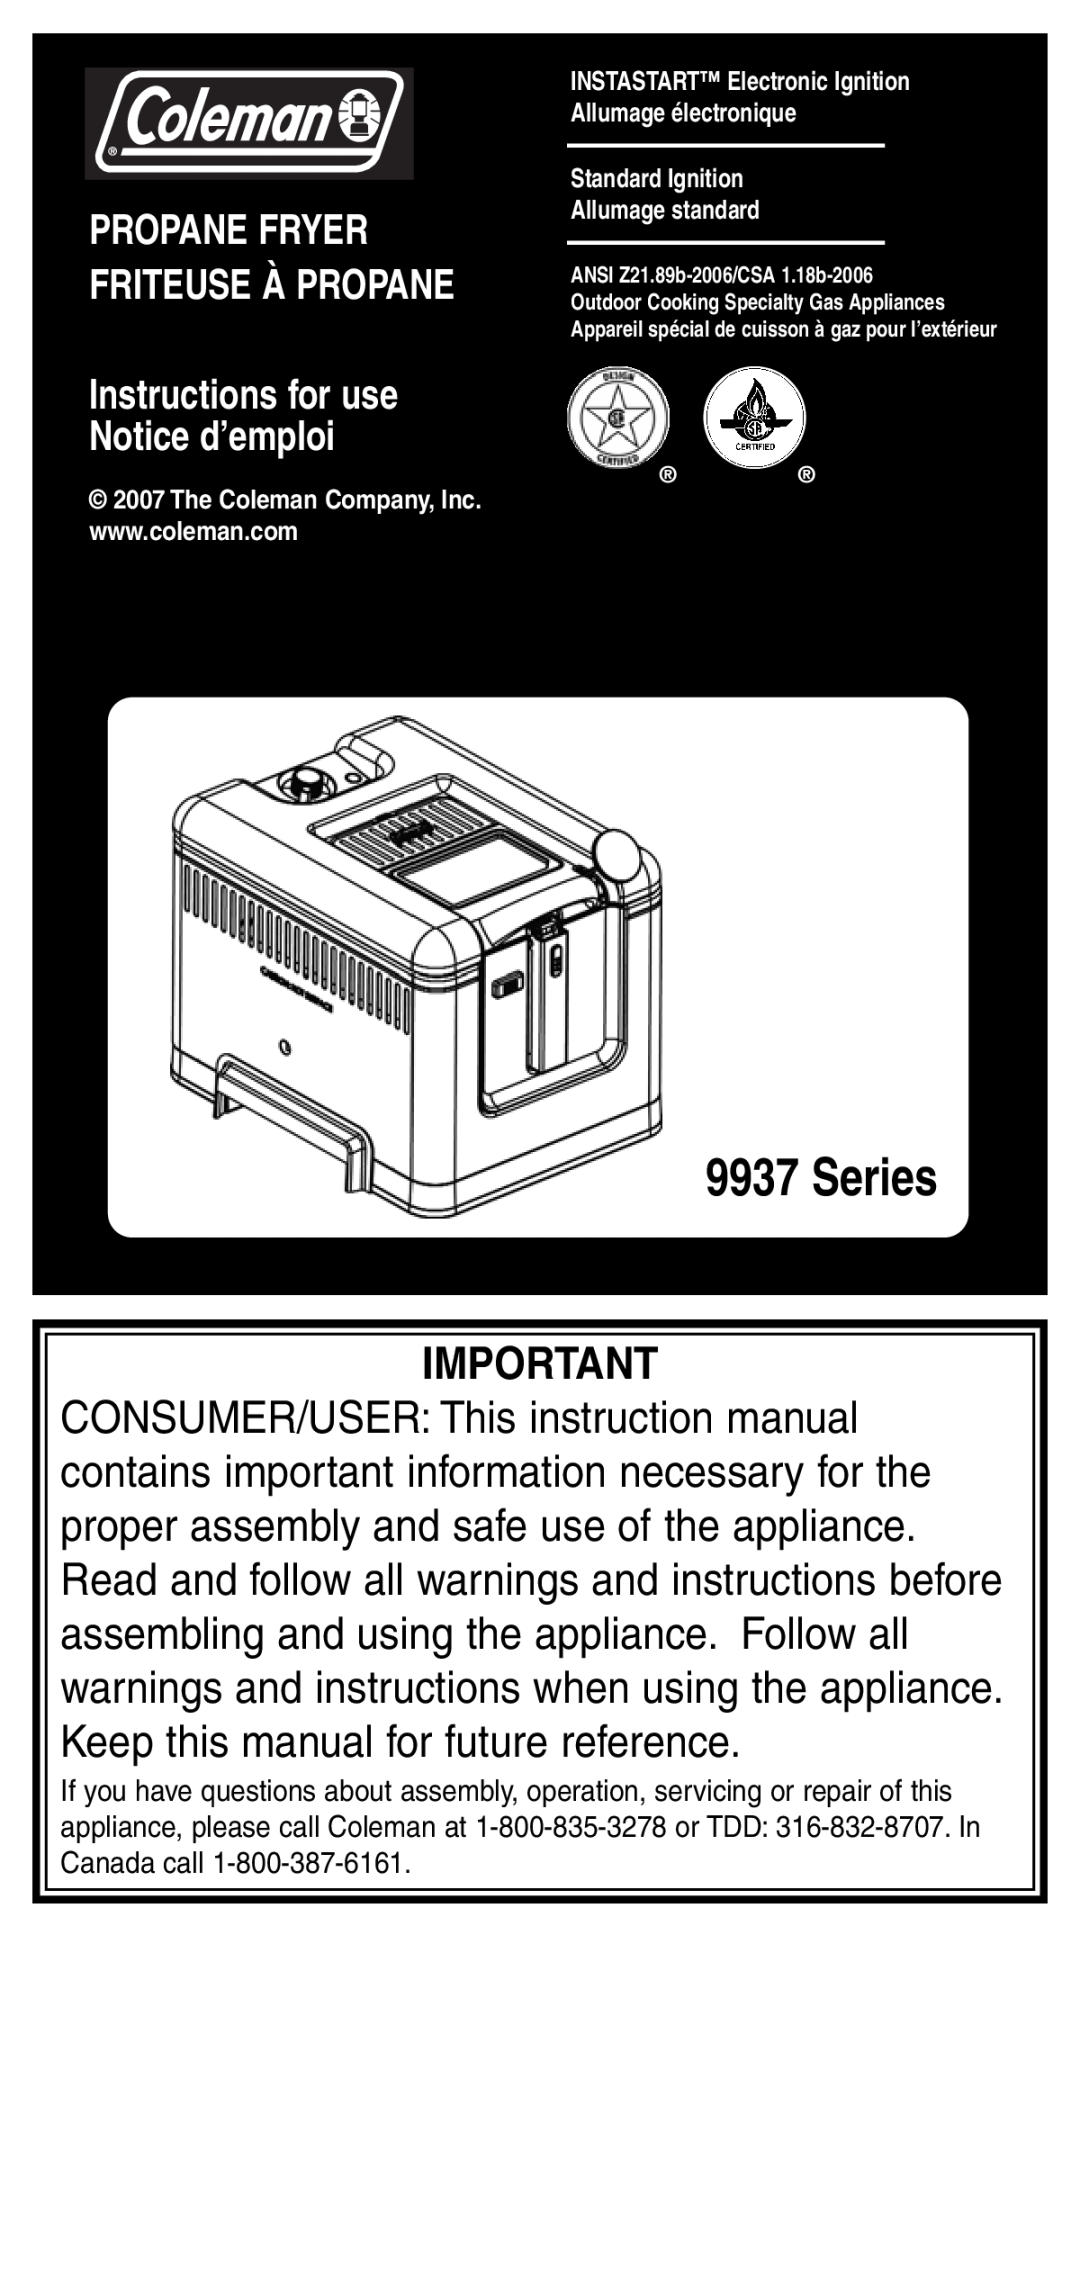 Coleman 9937 instruction manual Series, PROPANE FRYER FRITEUSE À PROPANE Instructions for use Notice d’emploi 